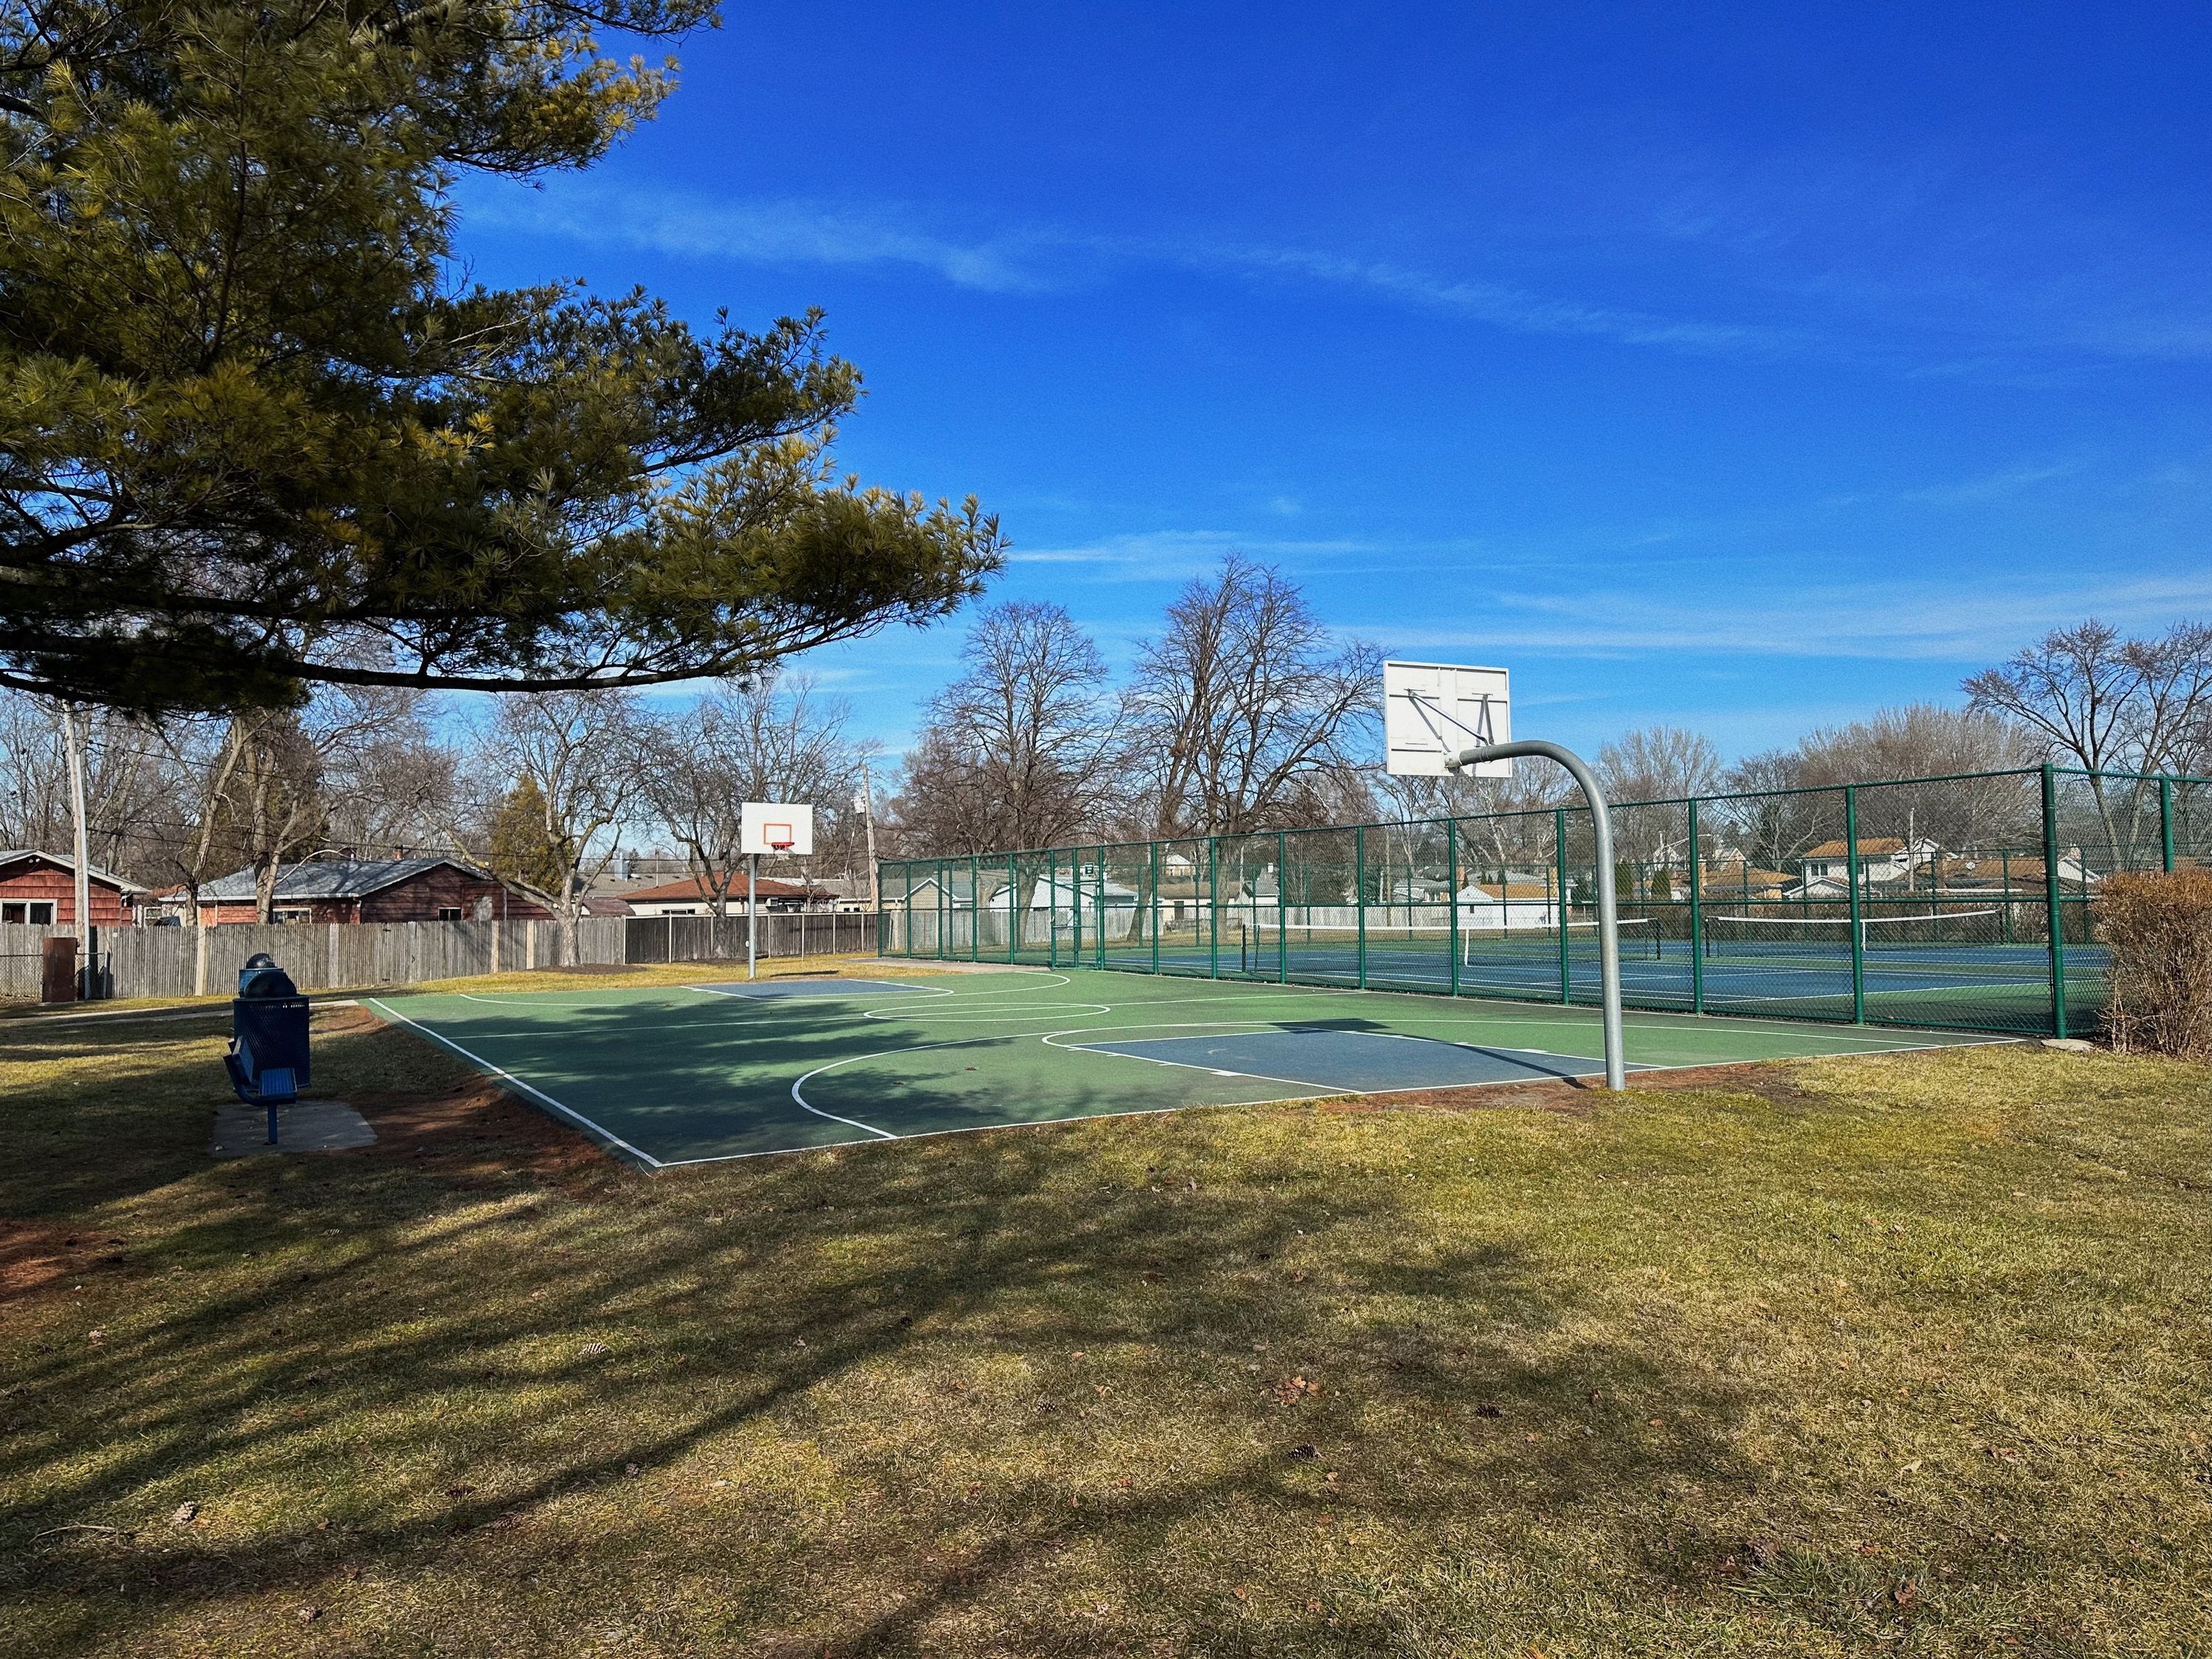 Picture of basketball court with blue sky with clouds